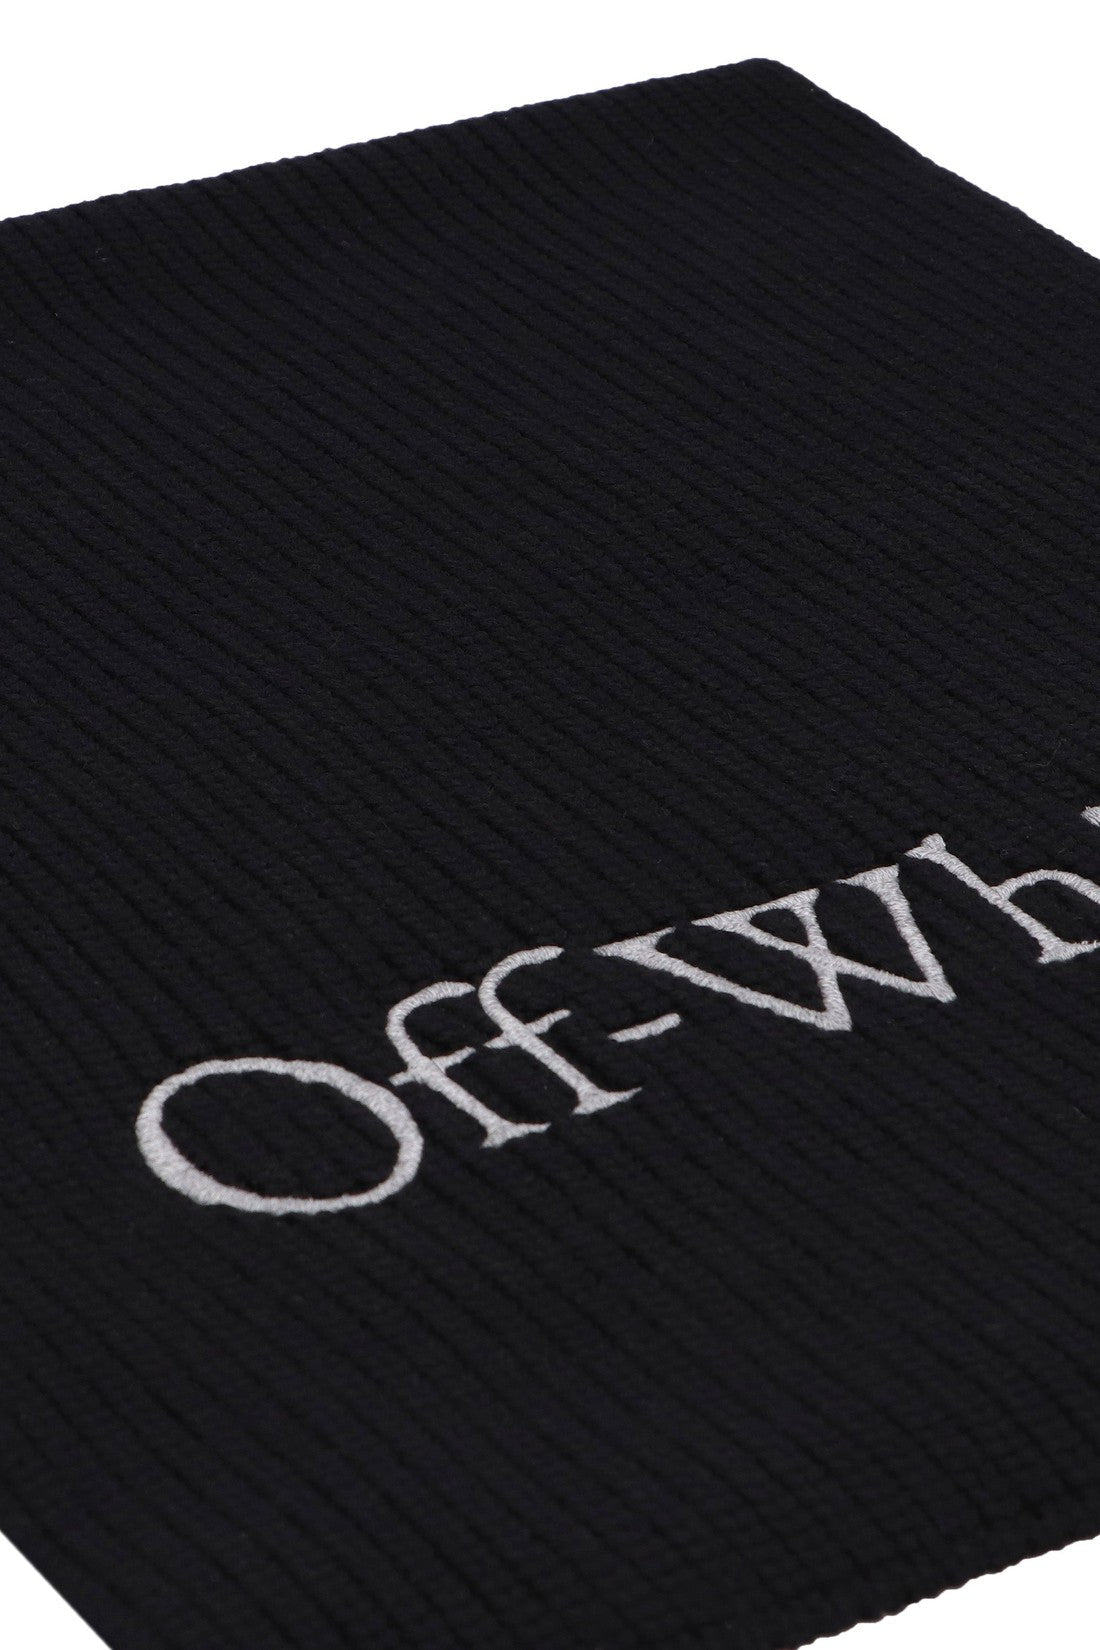 Off-White-OUTLET-SALE-Virgin wool scarf-ARCHIVIST